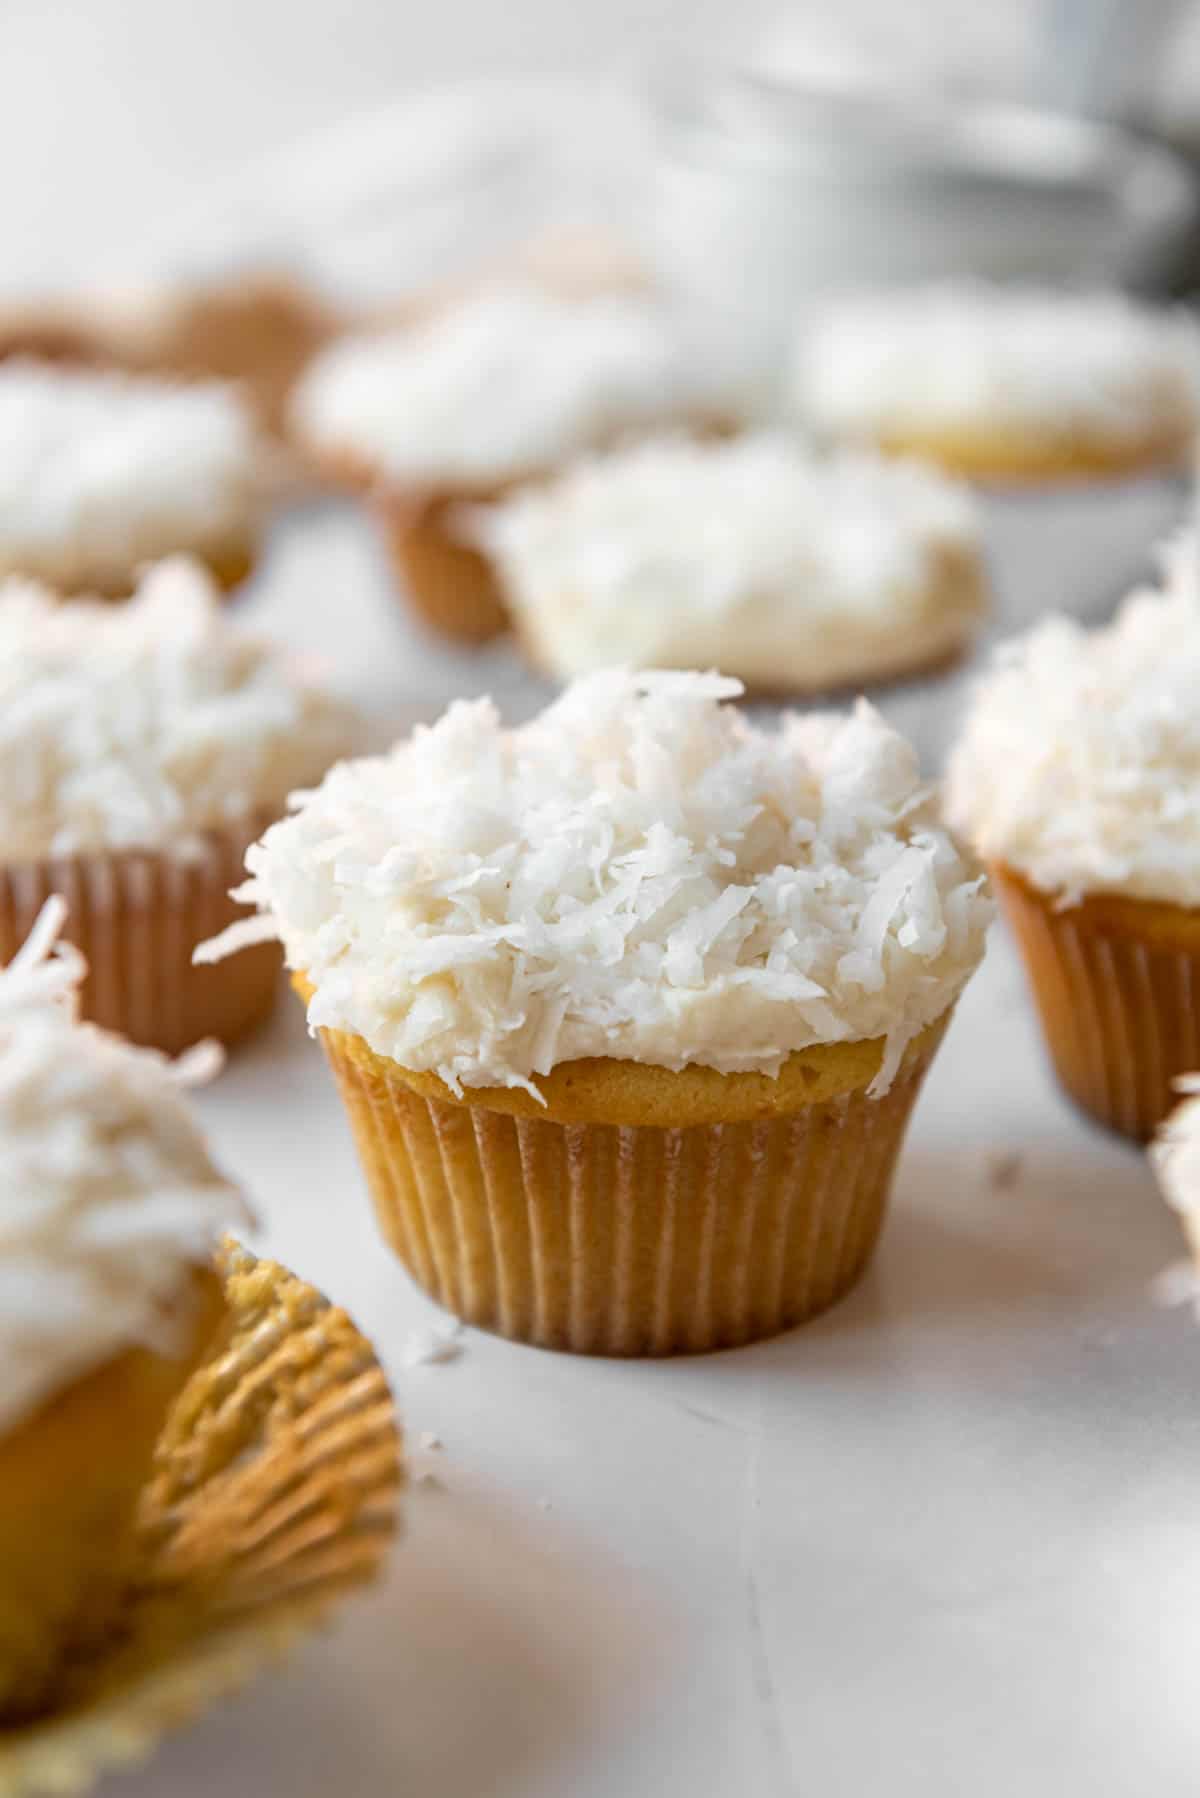 Homemade coconut cupcakes on a white surface.